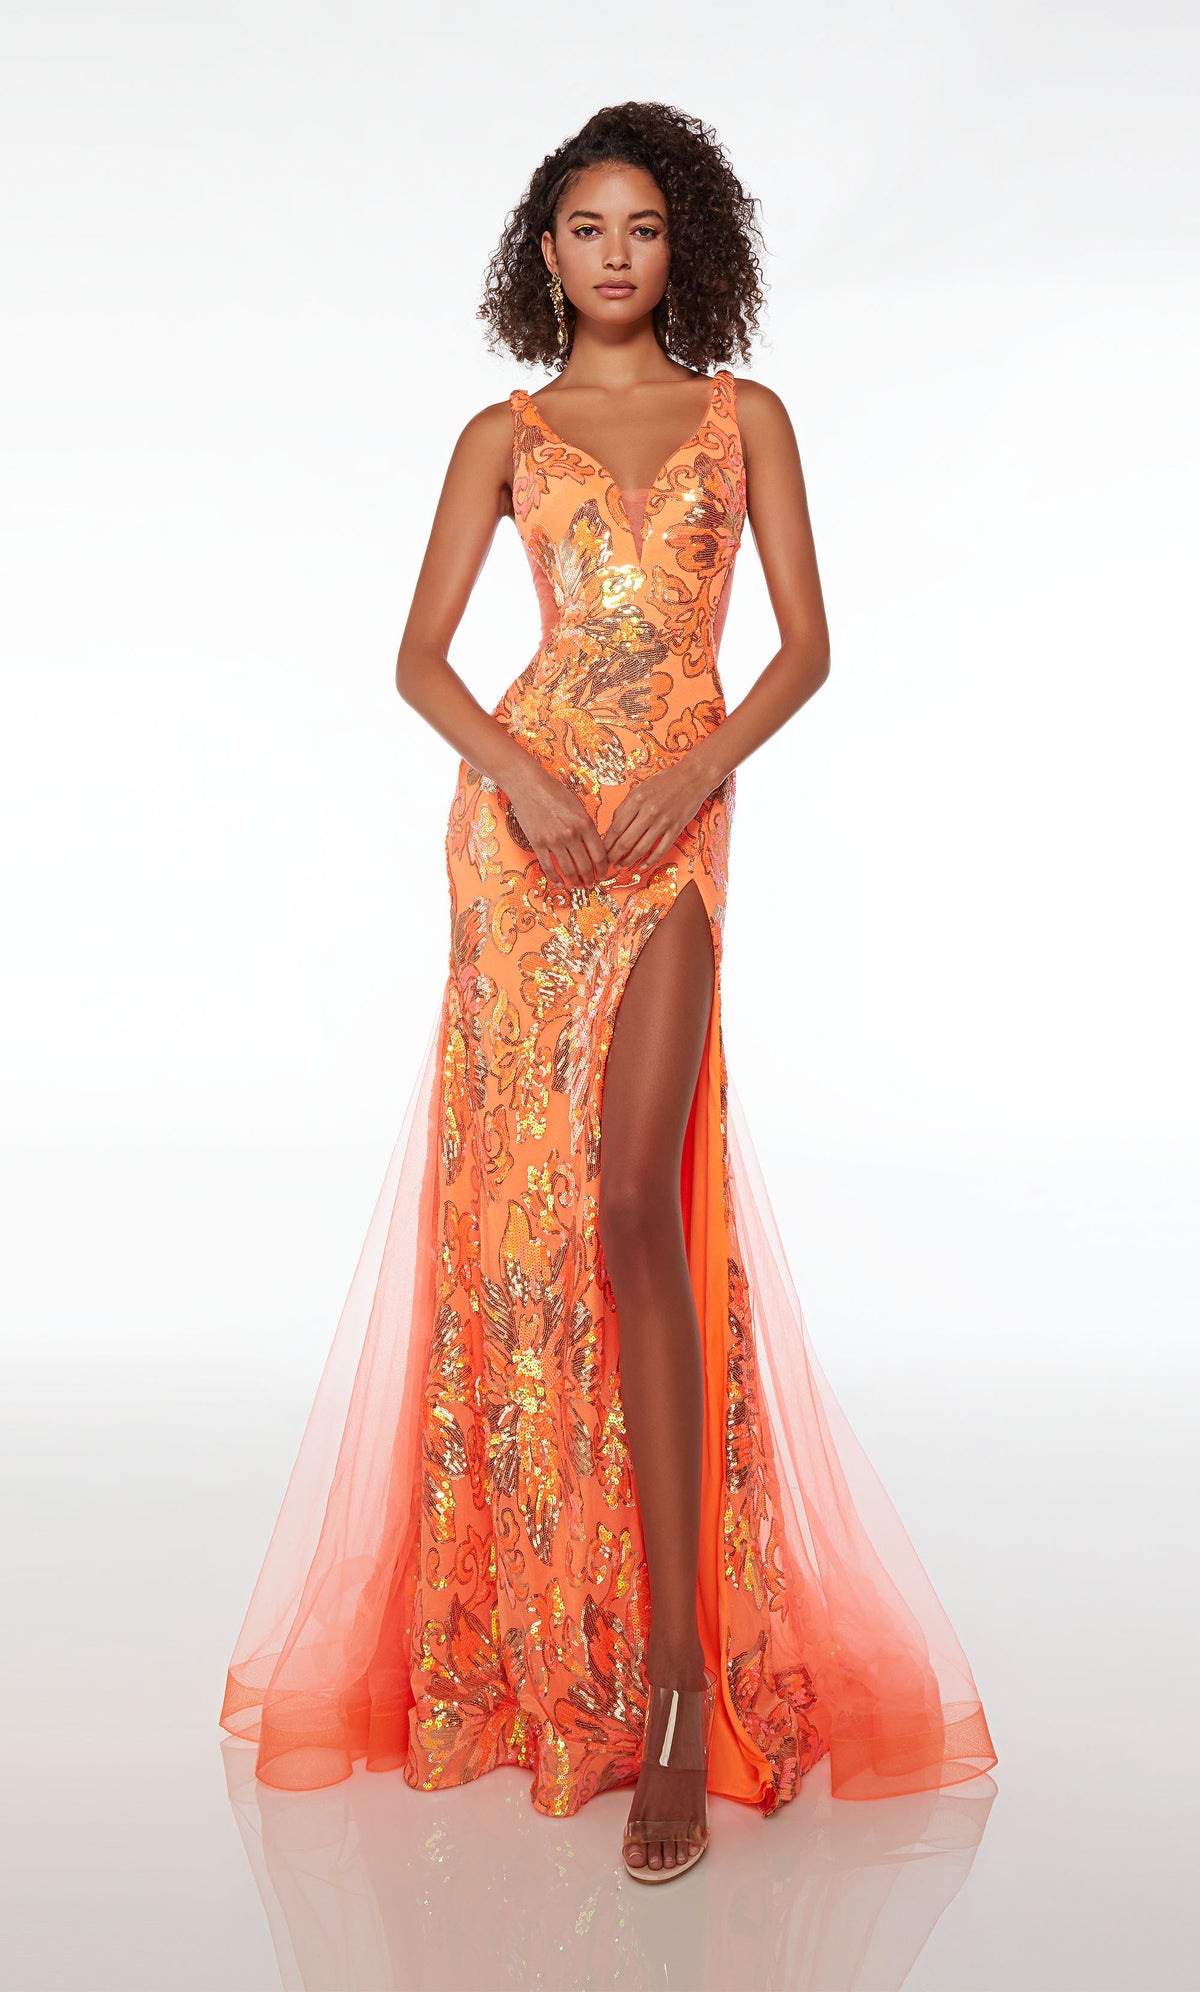 Alluring plunging mermaid dress in orange tulle with high slit, illusion side cutouts, V-shaped back, and an train, adorned with an sequin floral design.